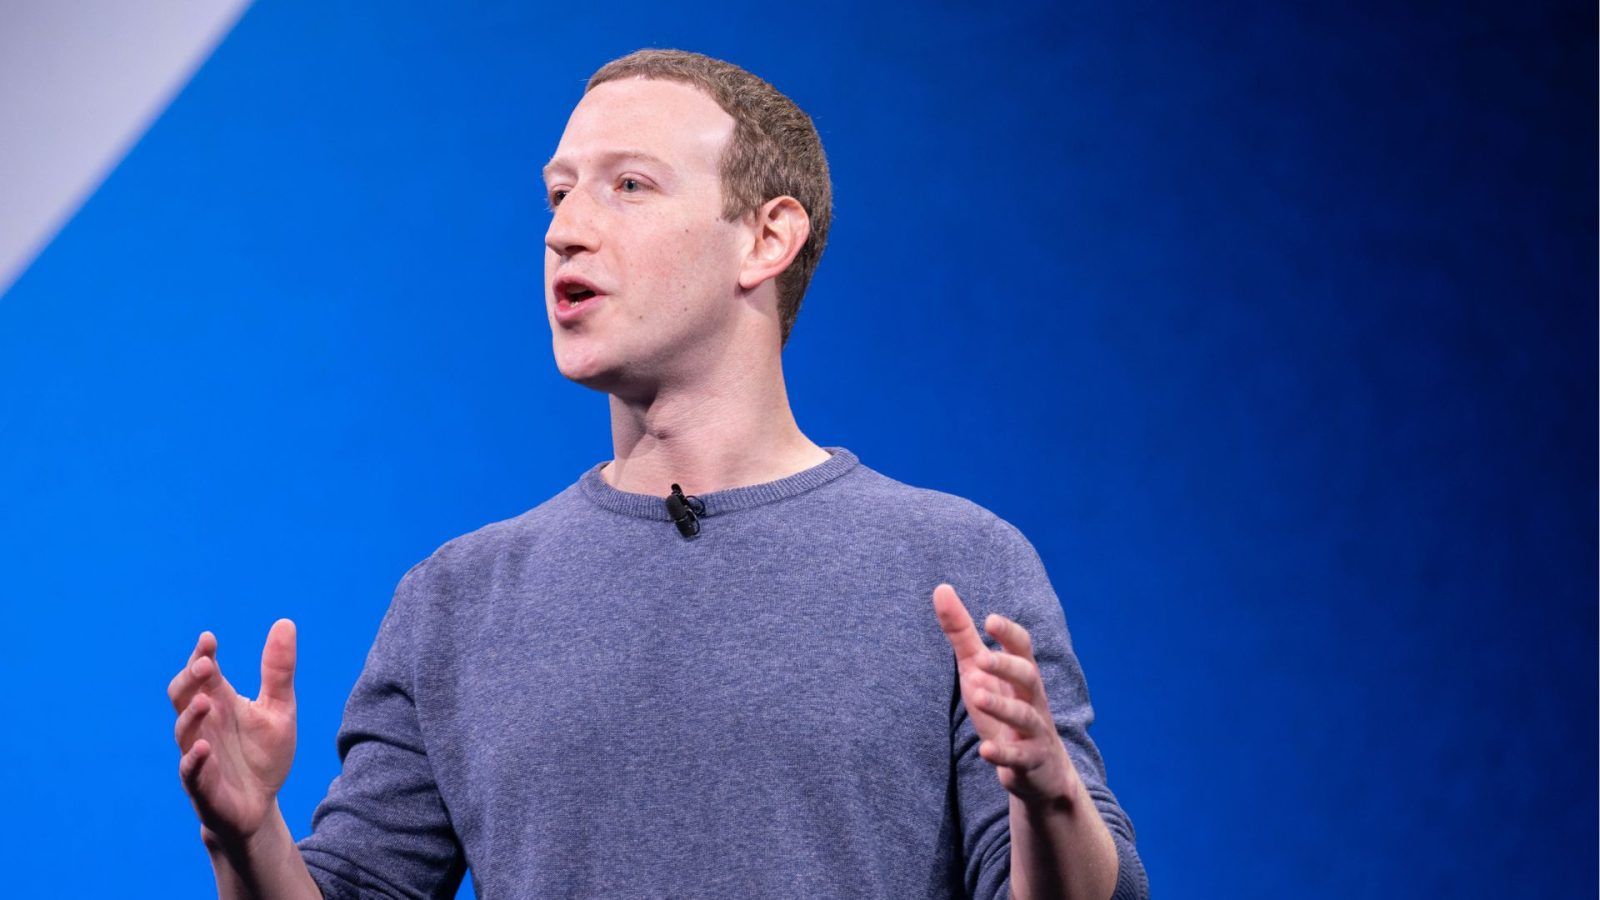 10 best books recommended by Mark Zuckerberg you must read